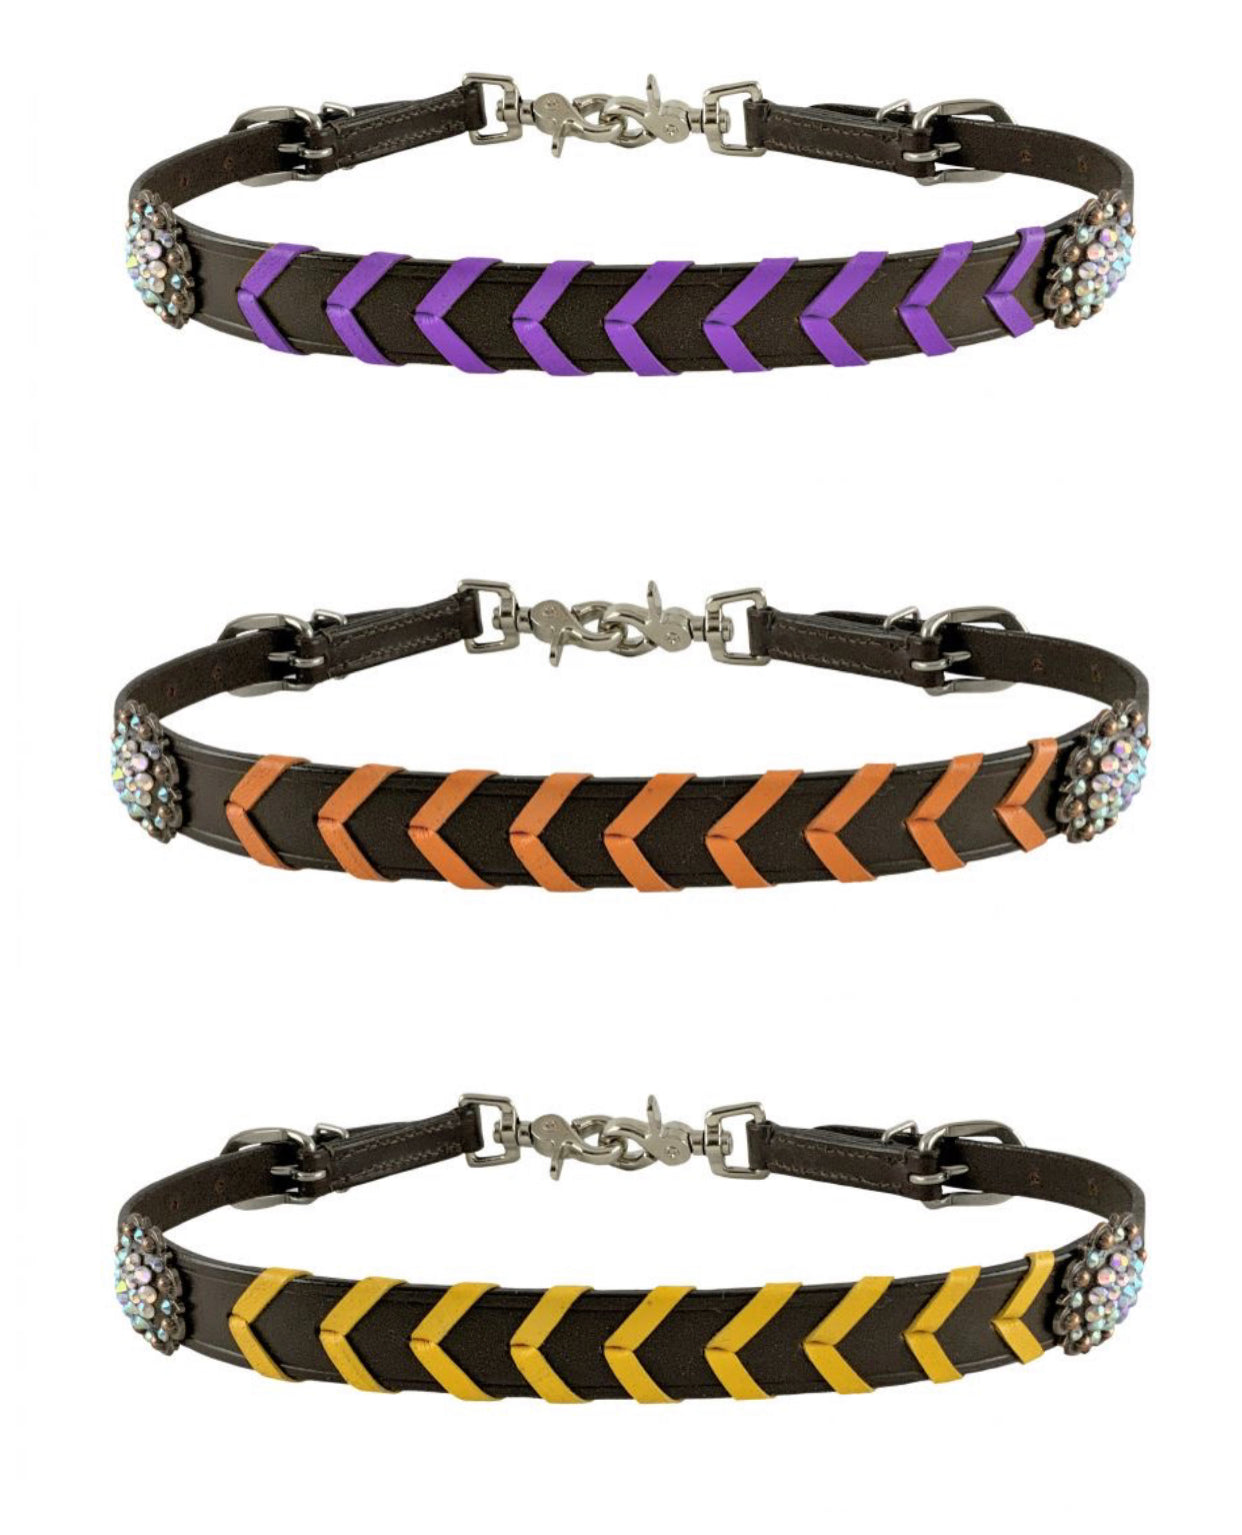 14703 - Leather wither strap with colorful rawhide lacing